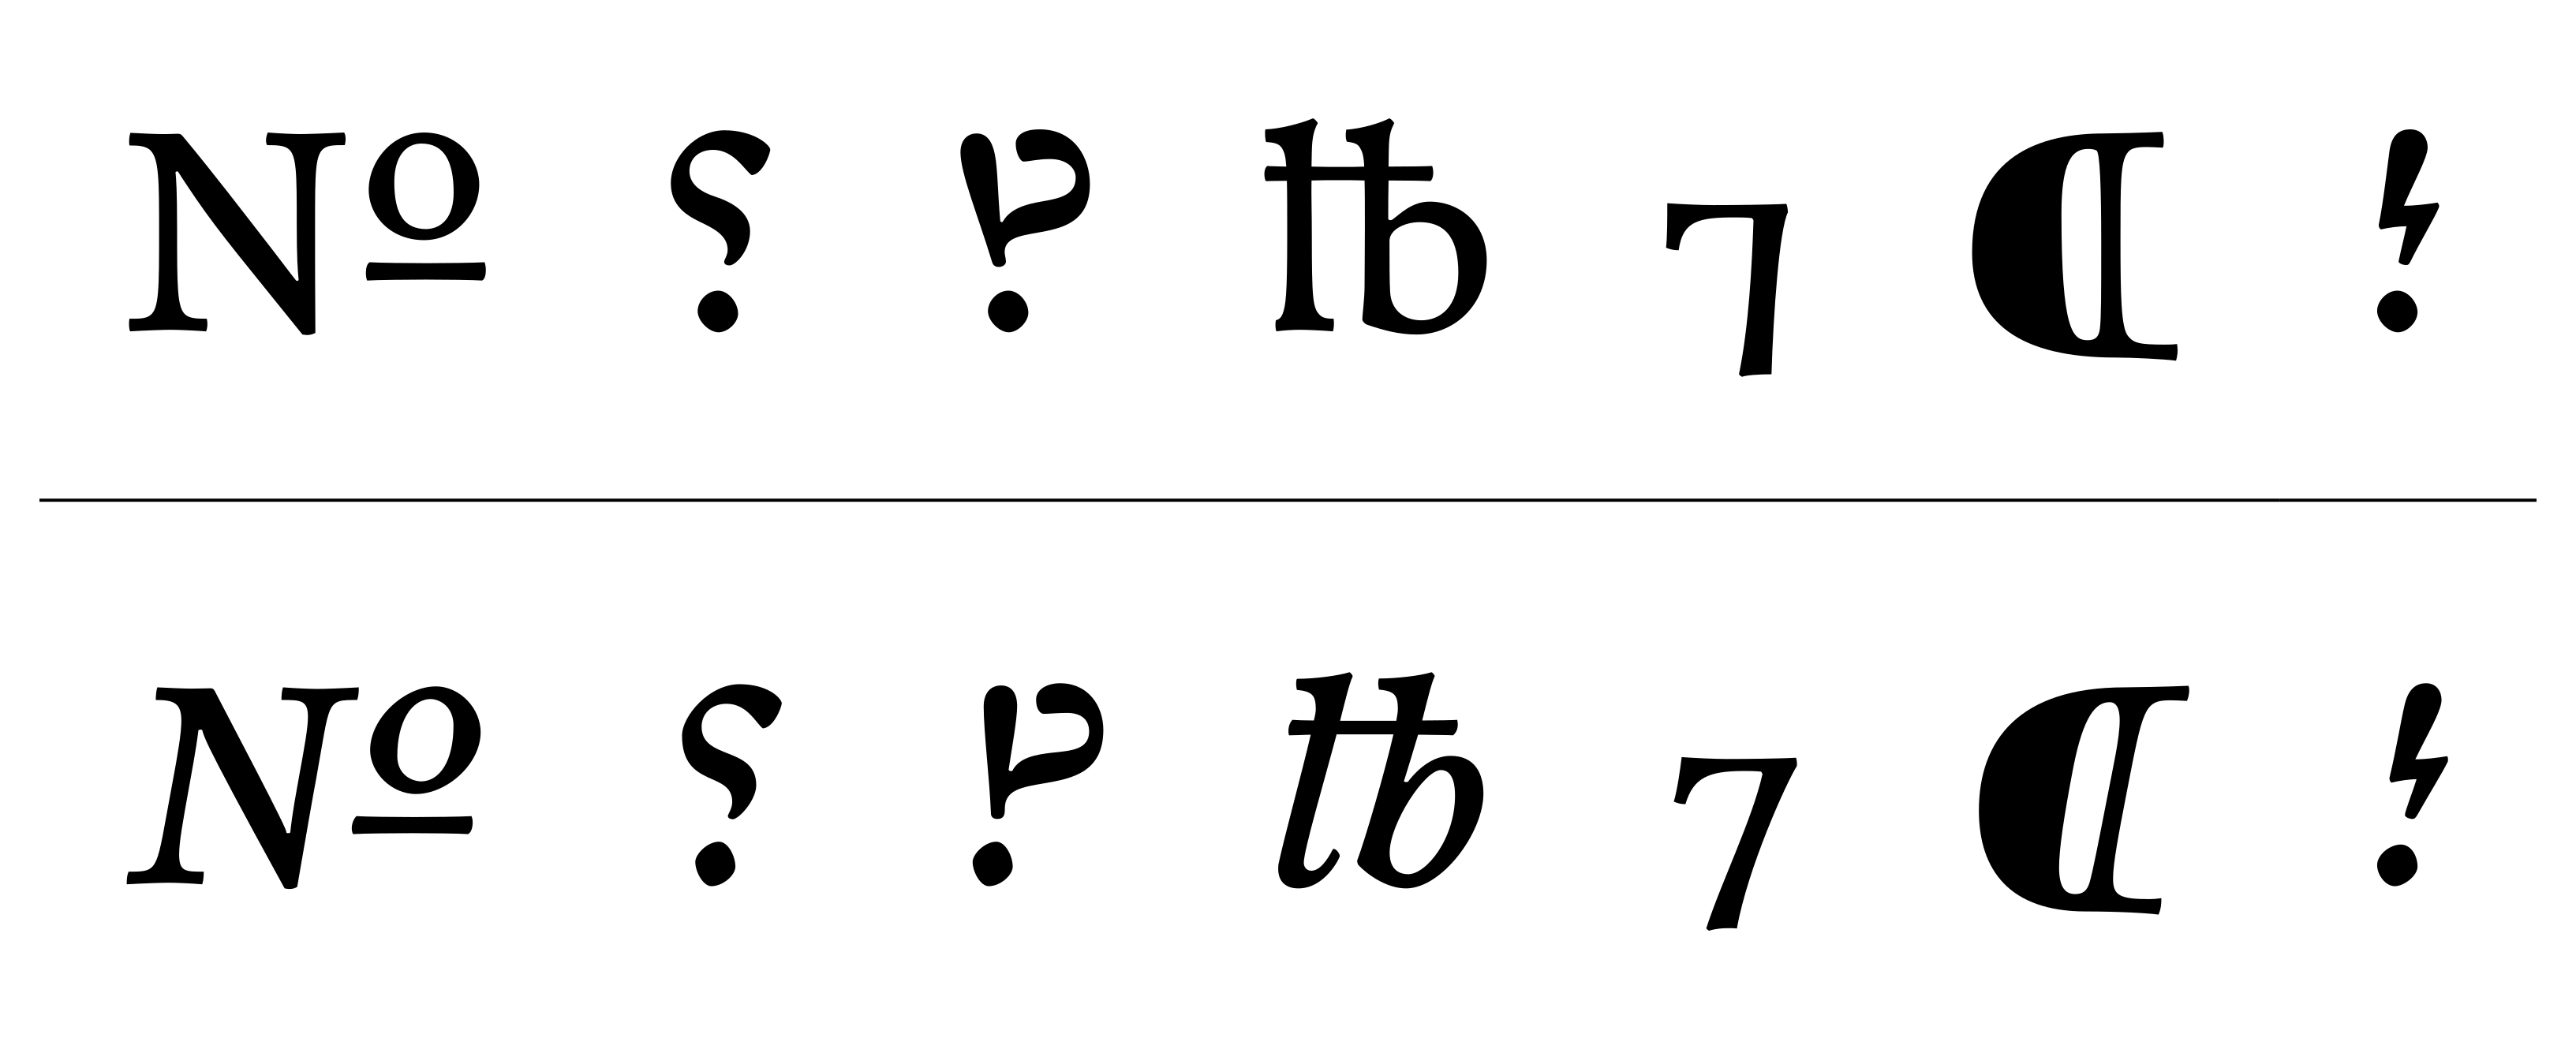 Custom symbols from Monokrom's Satyr typeface, as designed by Sindre Bremnes.